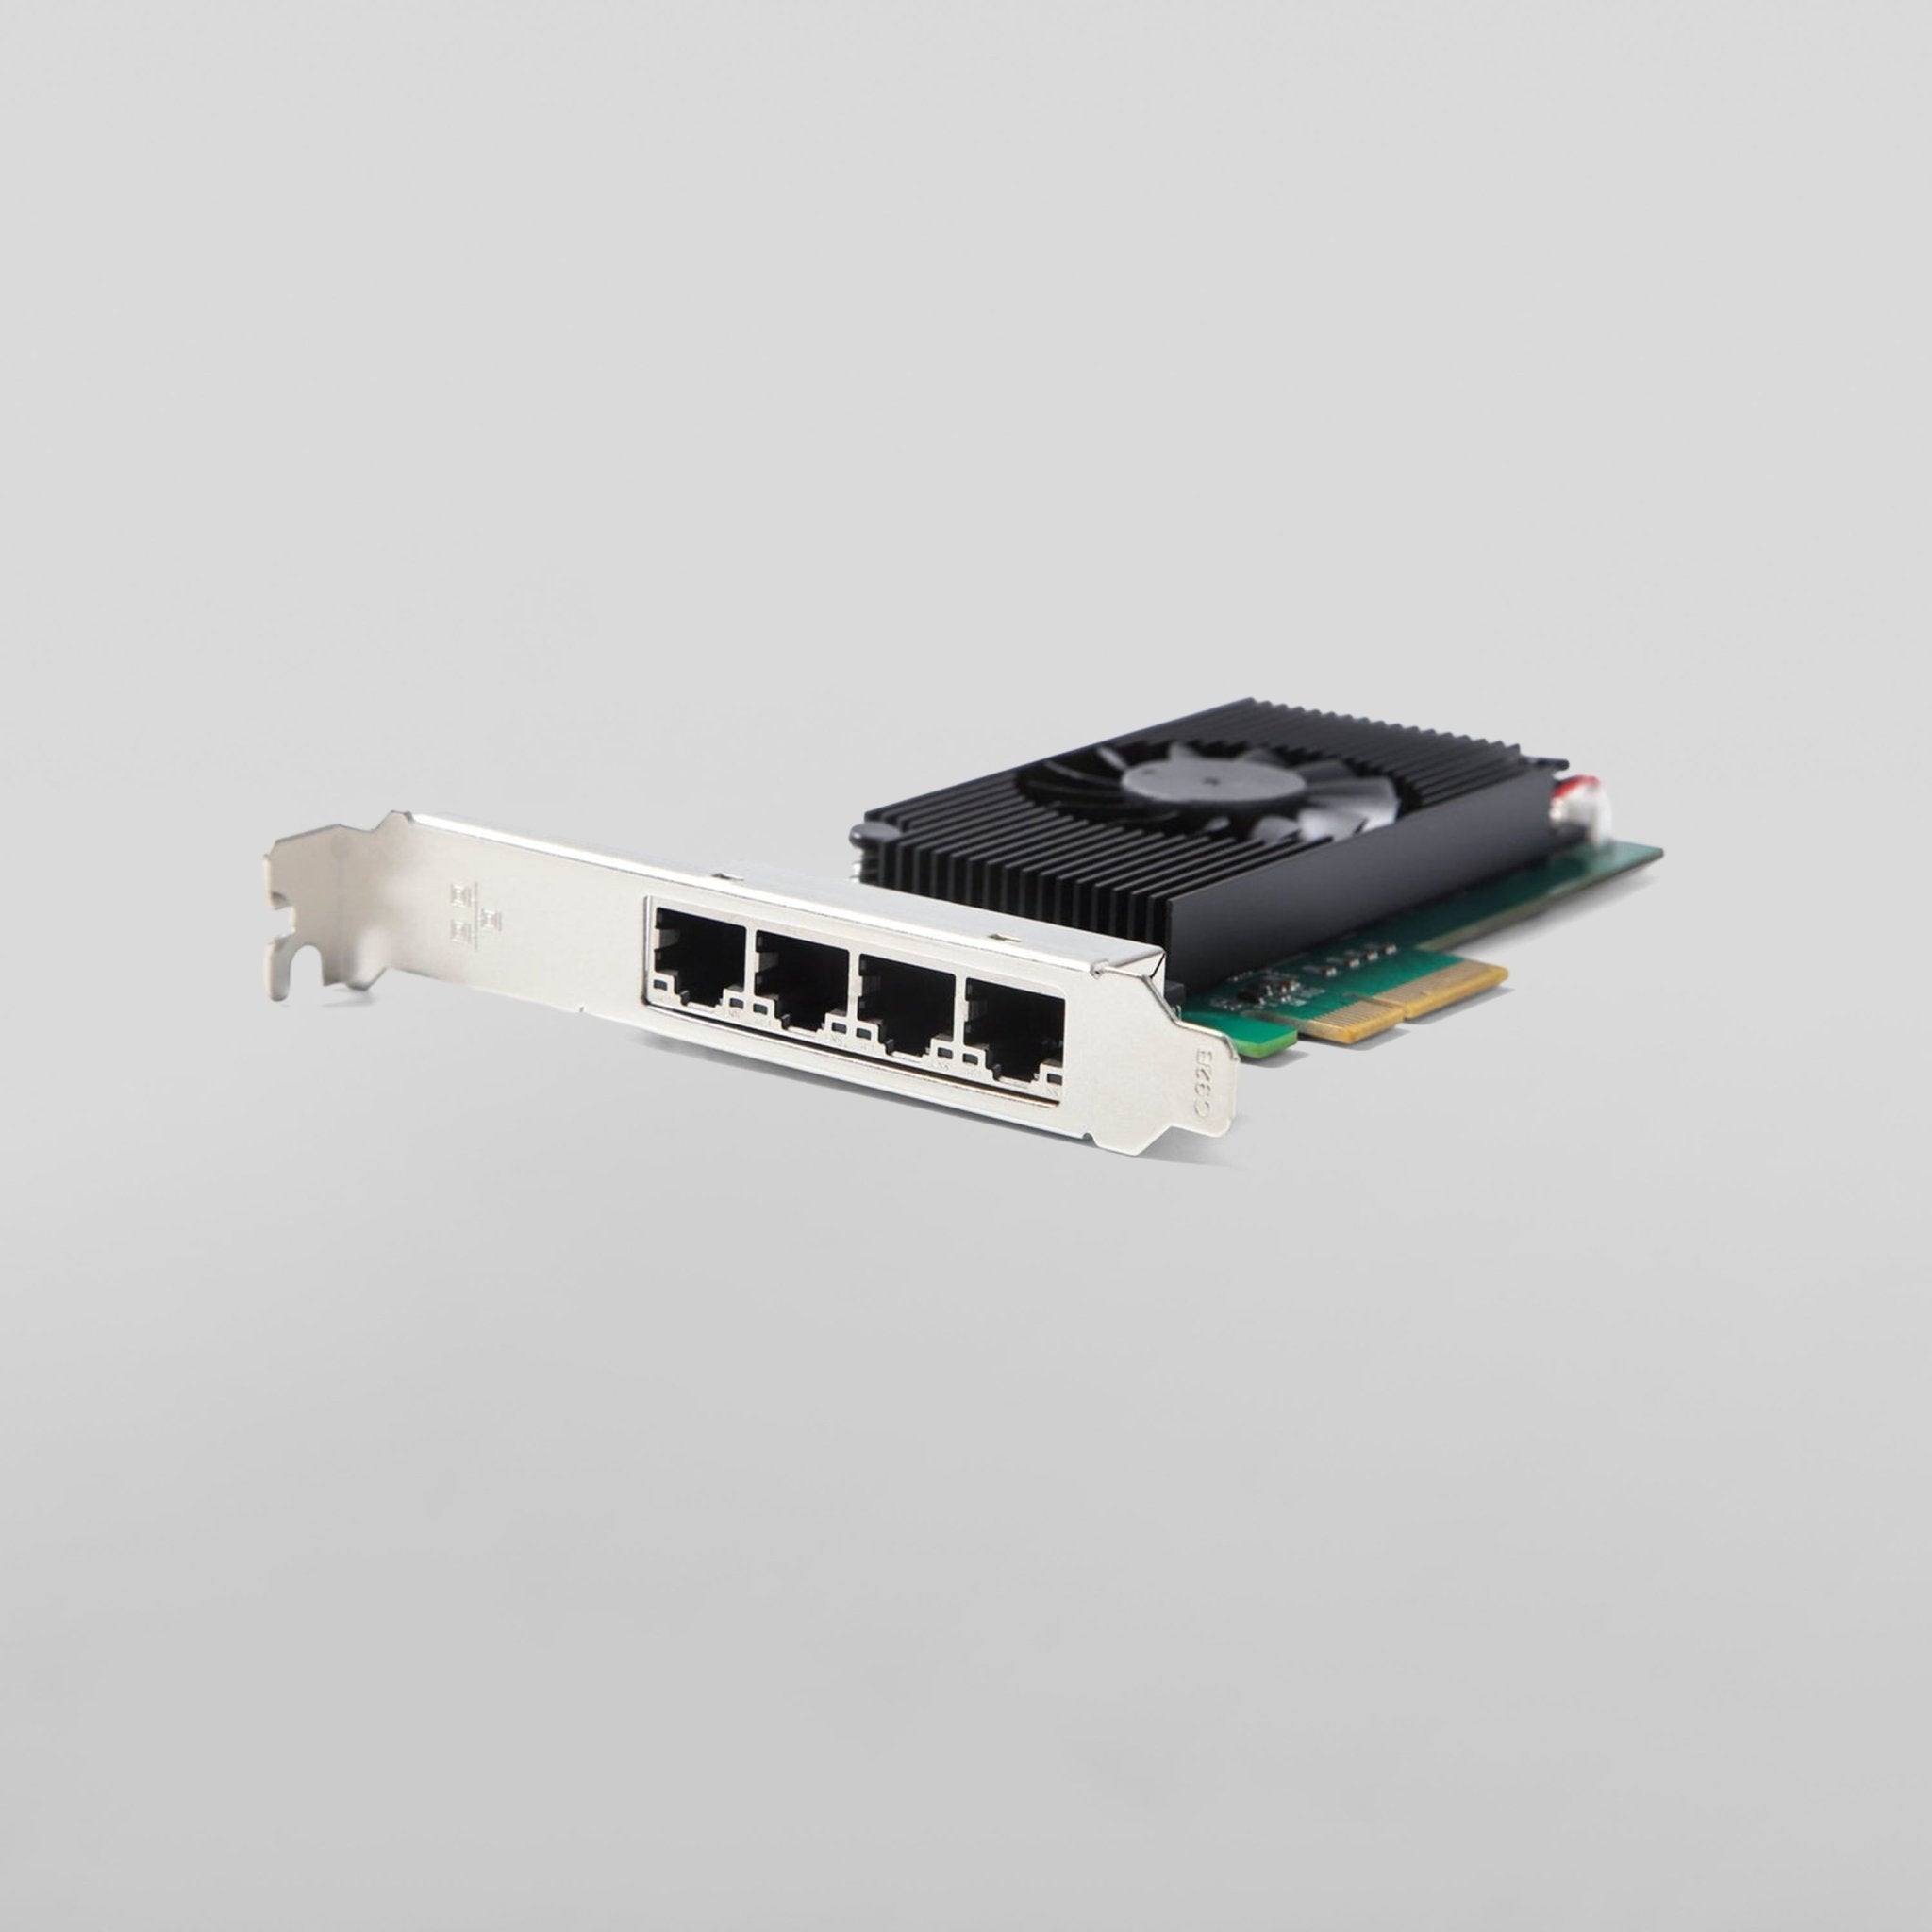 PCIe to 4-Port 2.5G Ethernet Adapter Intel I225 Chipset - Zima Store Online